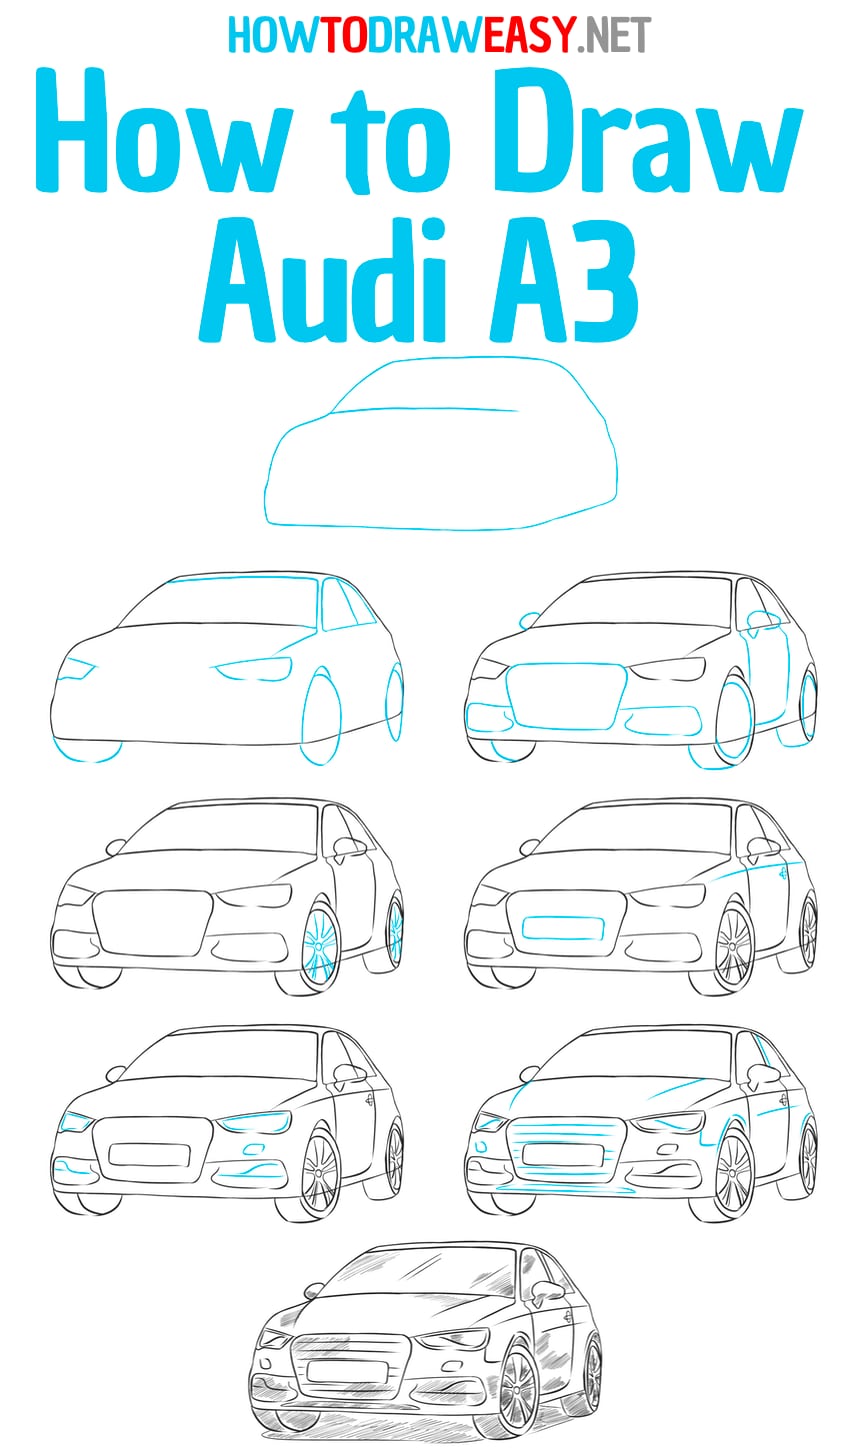 how to draw audi a3 step by step